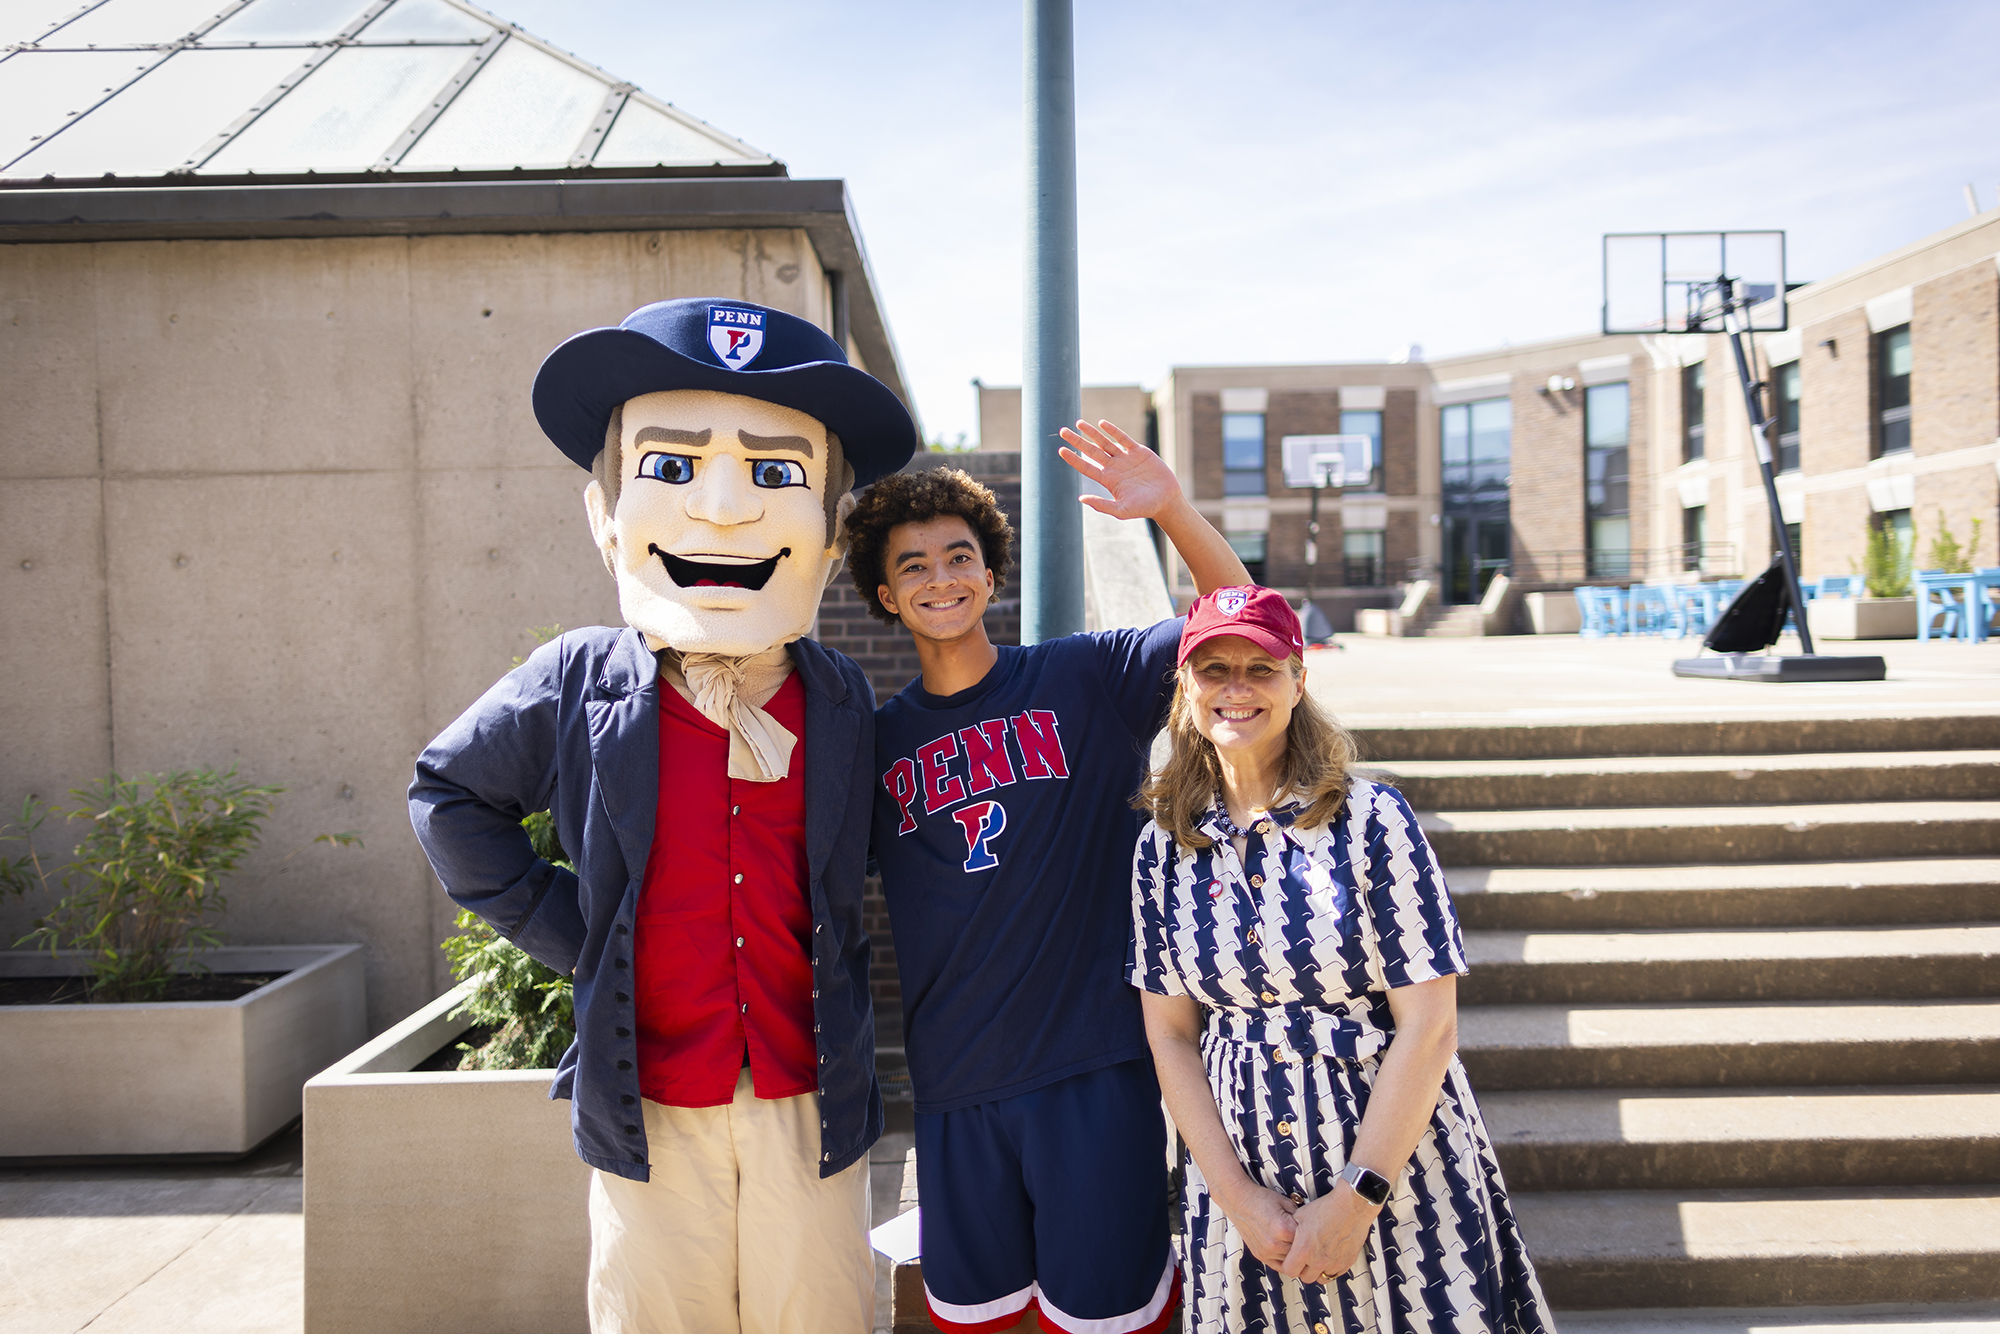 Penn President Liz Magill and the Penn Quaker mascot with a new student who is waving.